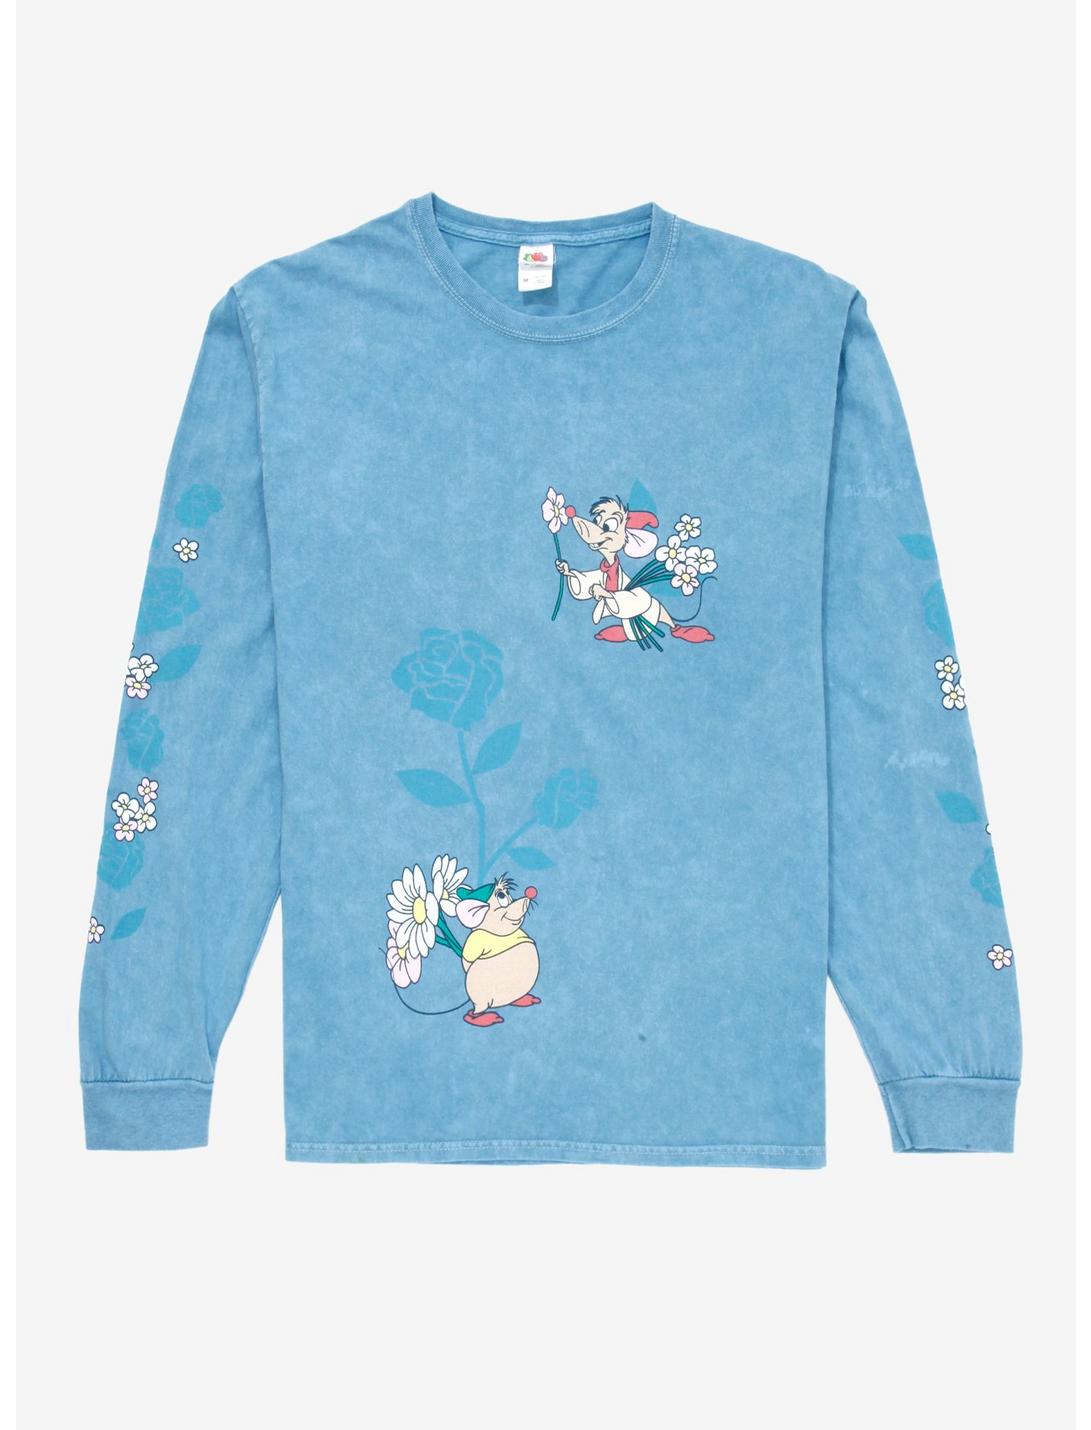 Disney Cinderella Jaq & Gus with Flowers Long Sleeve T-Shirt - BoxLunch ...